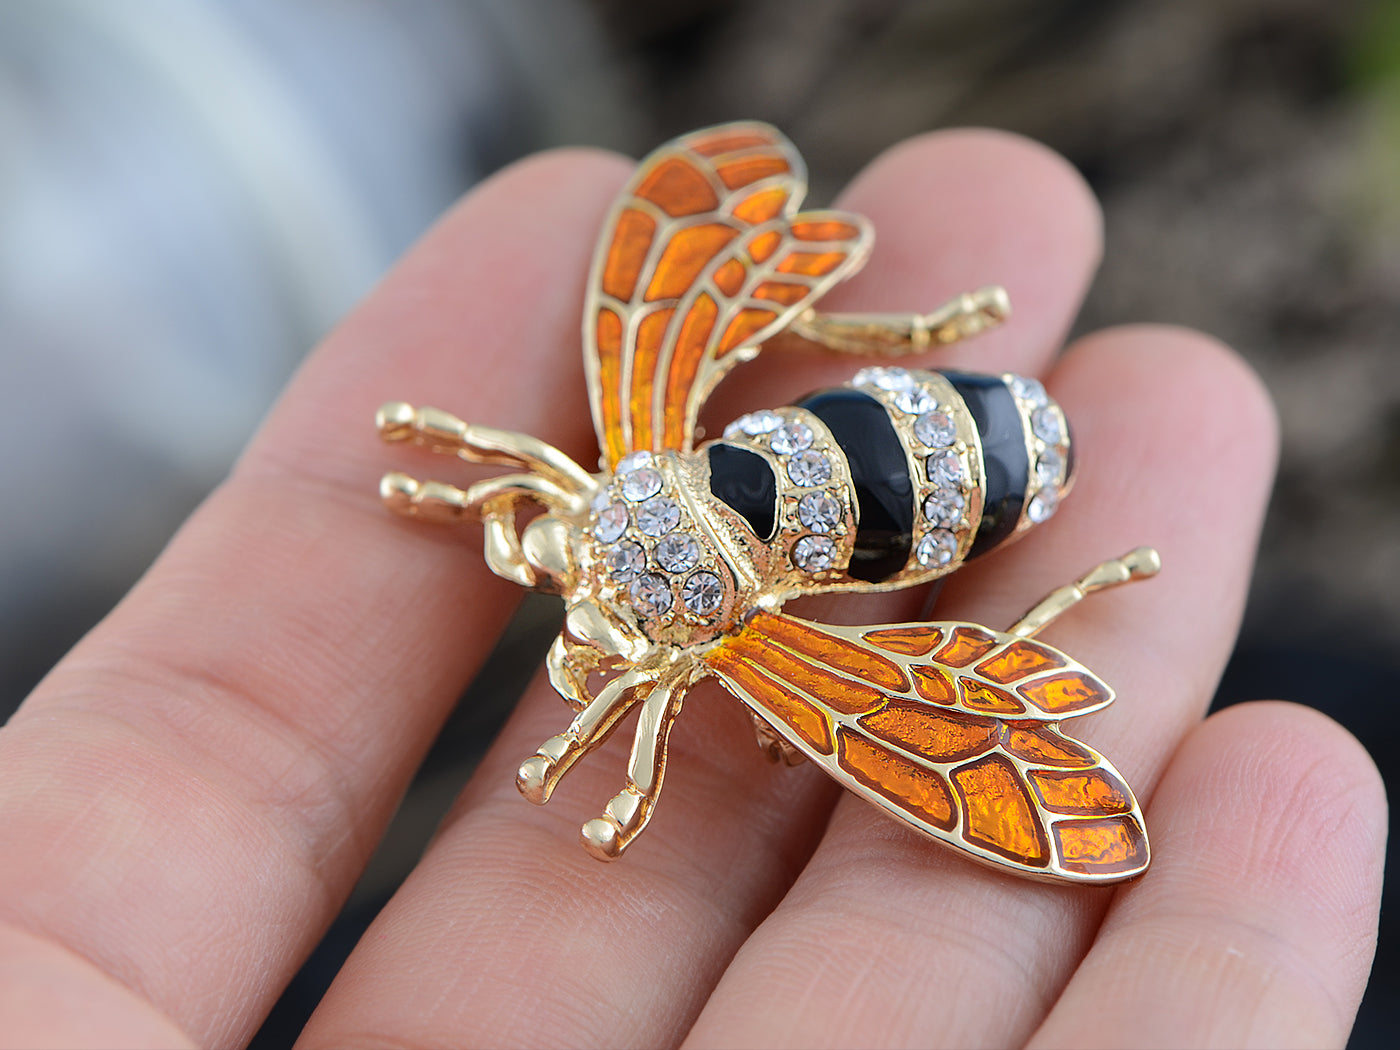 Rose Copper Sapphire Blue Colored Beetle Bee Brooch Pin